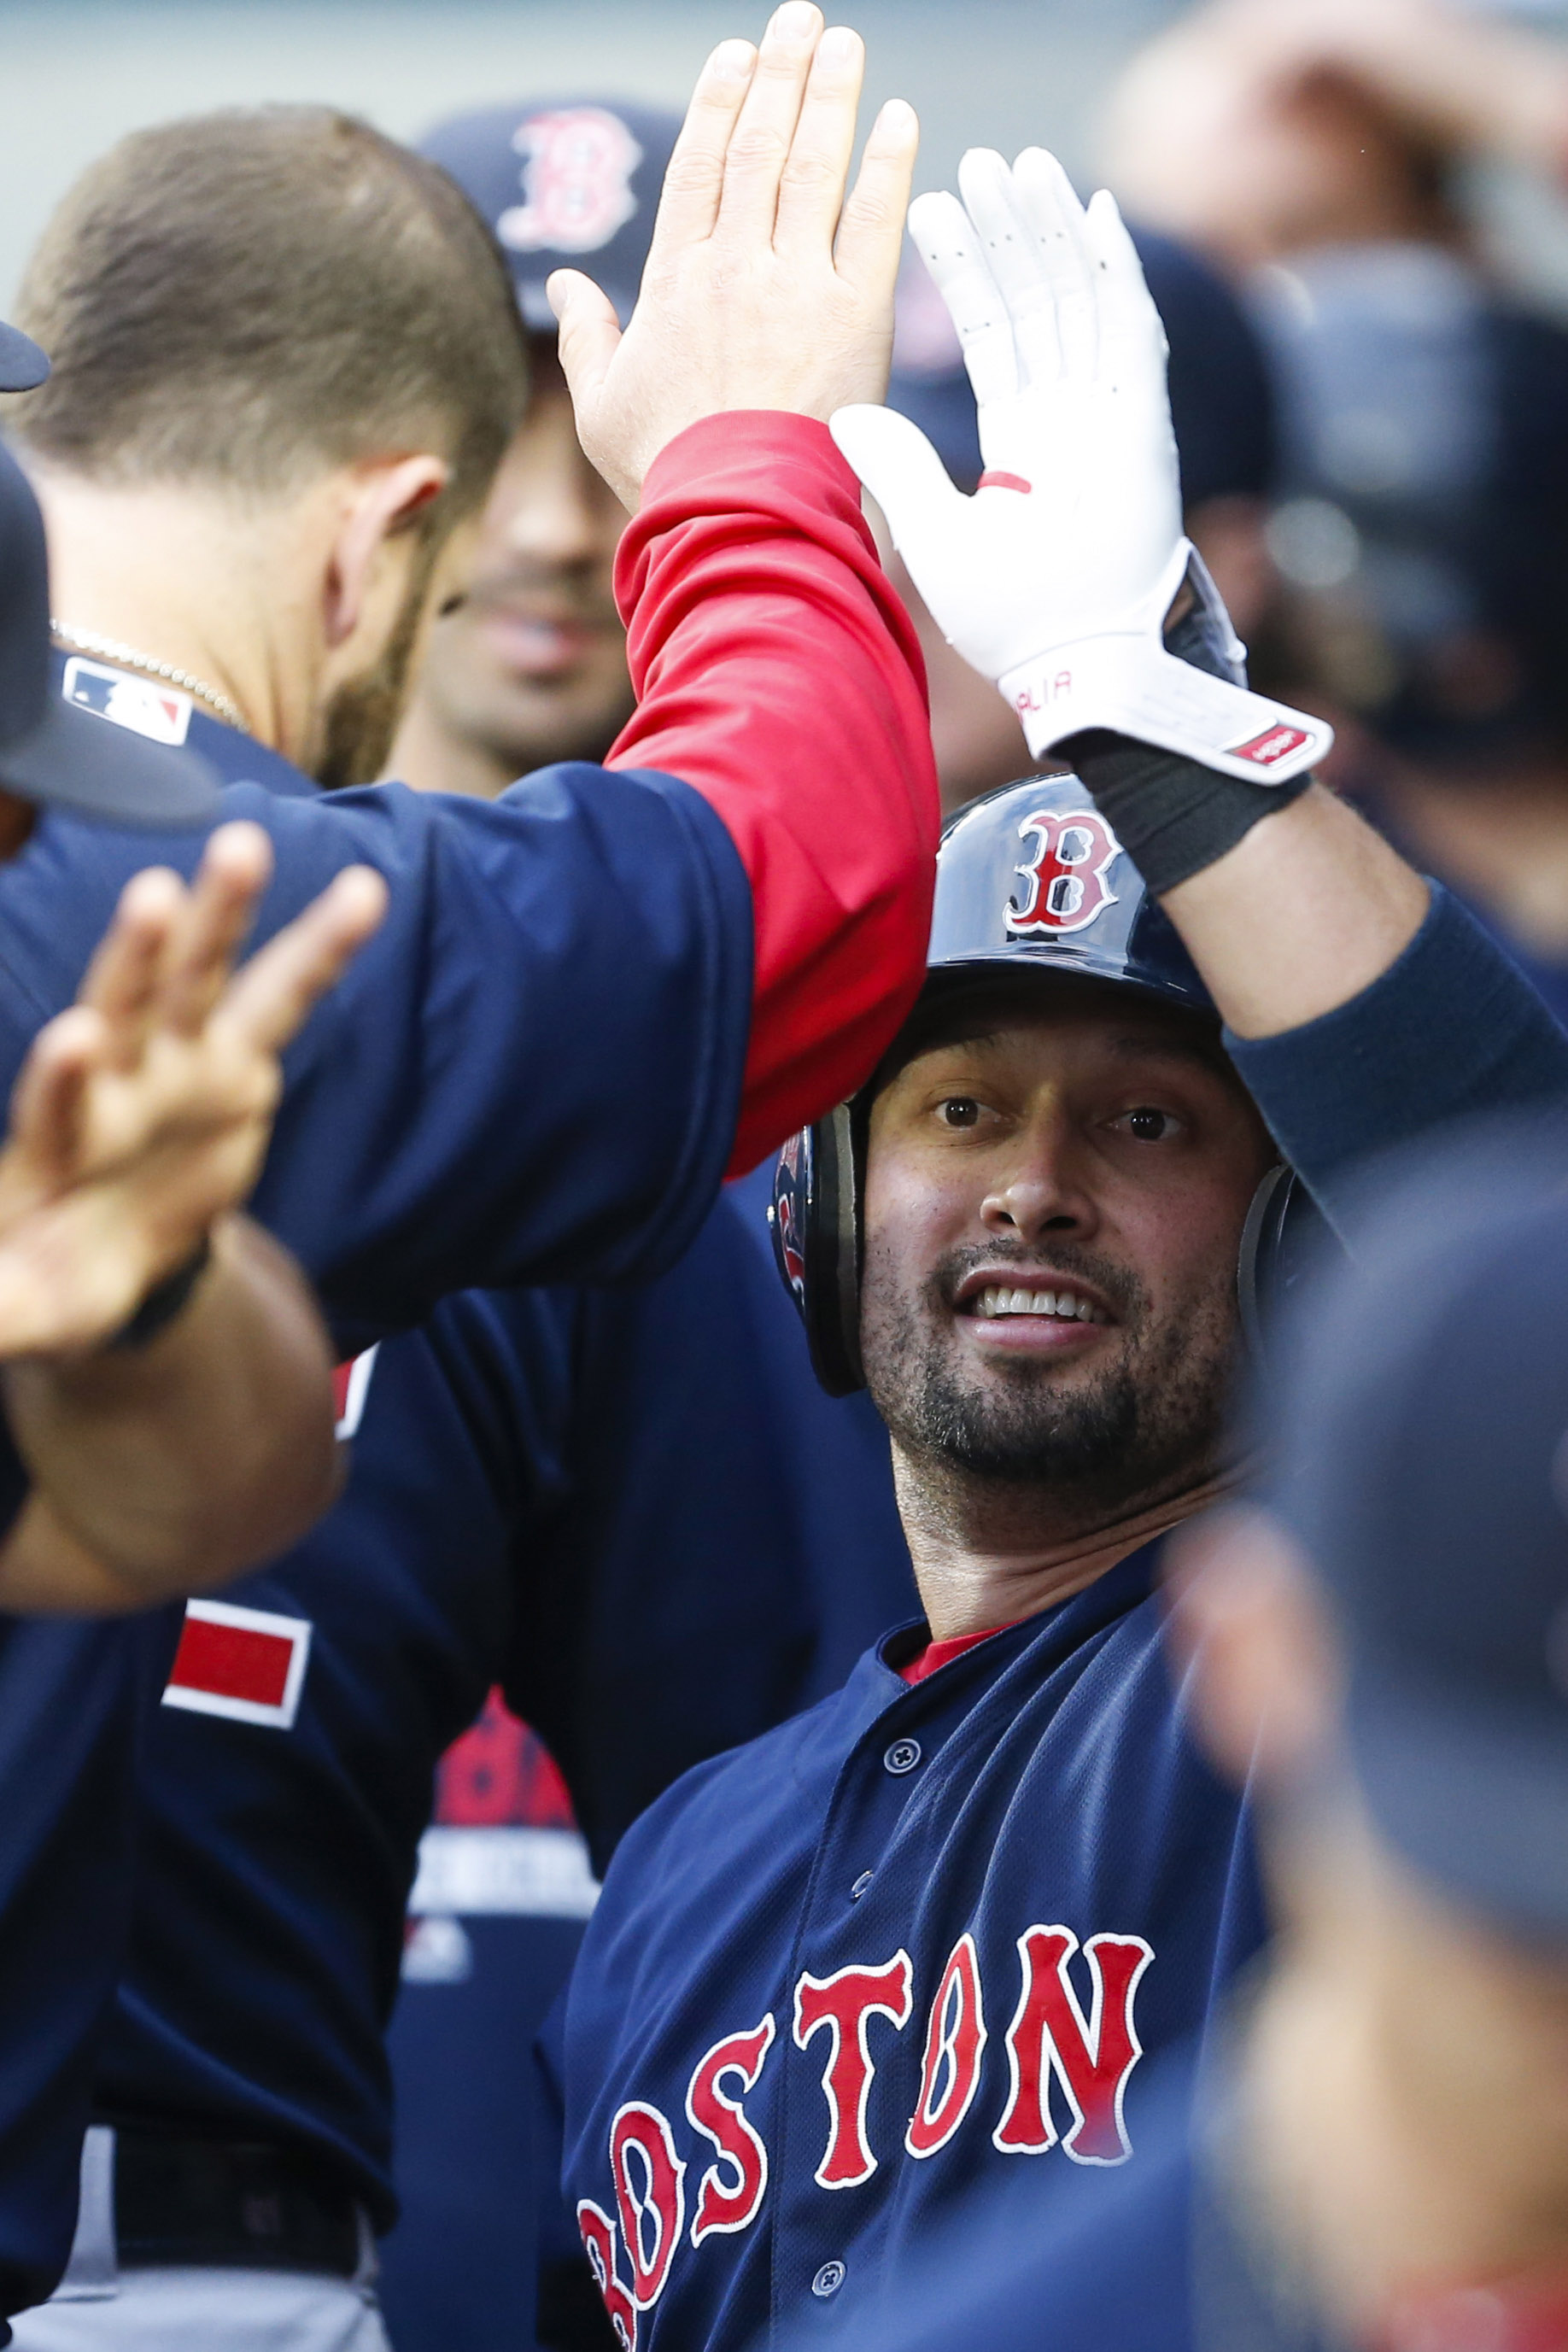 Step 1: Angels acquire outfielder Shane Victorino from Red Sox